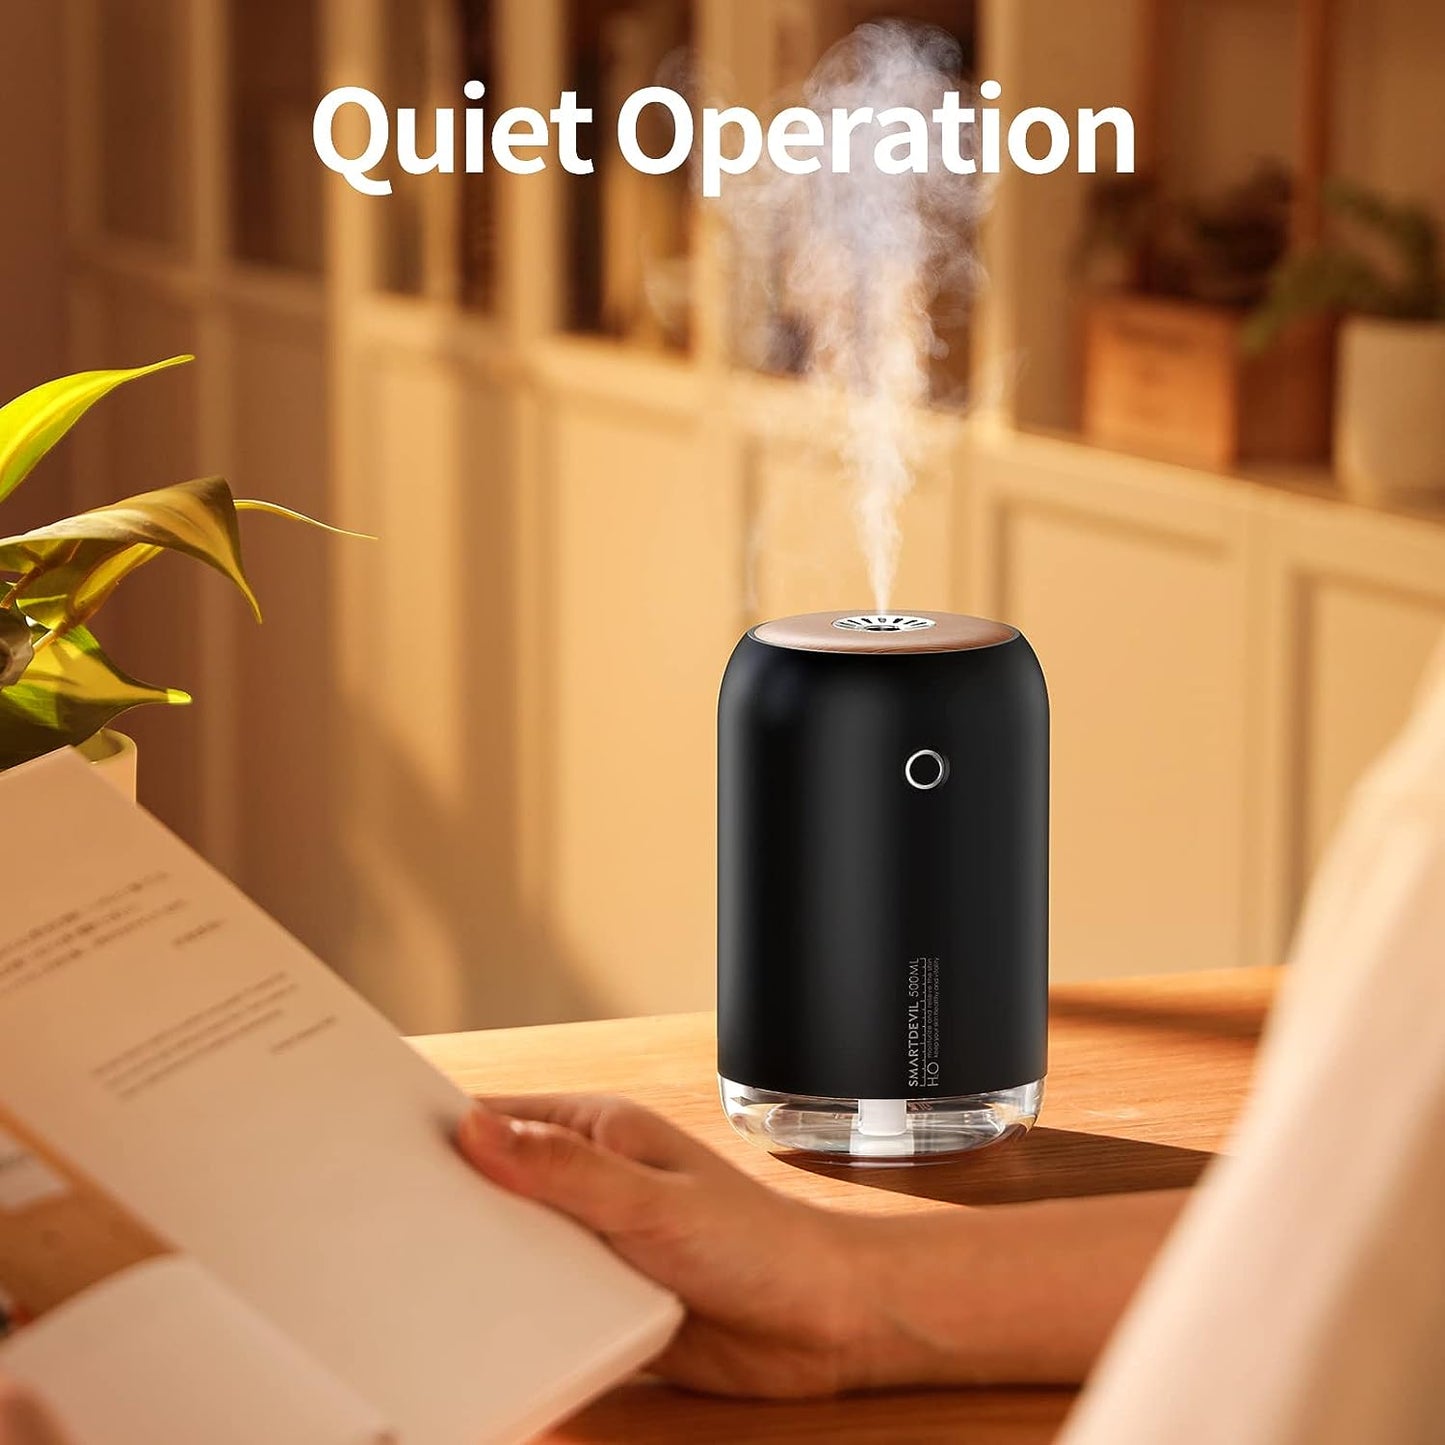 SmartDevil Small Air Humidifier, 500ml Portable Desk Humidifier, USB Personal Humidifier for Bedroom, Office, Plant, Travel with Night Light, Auto Shut-Off, 2 Mist Modes, Super Quiet, Black Wood Grain